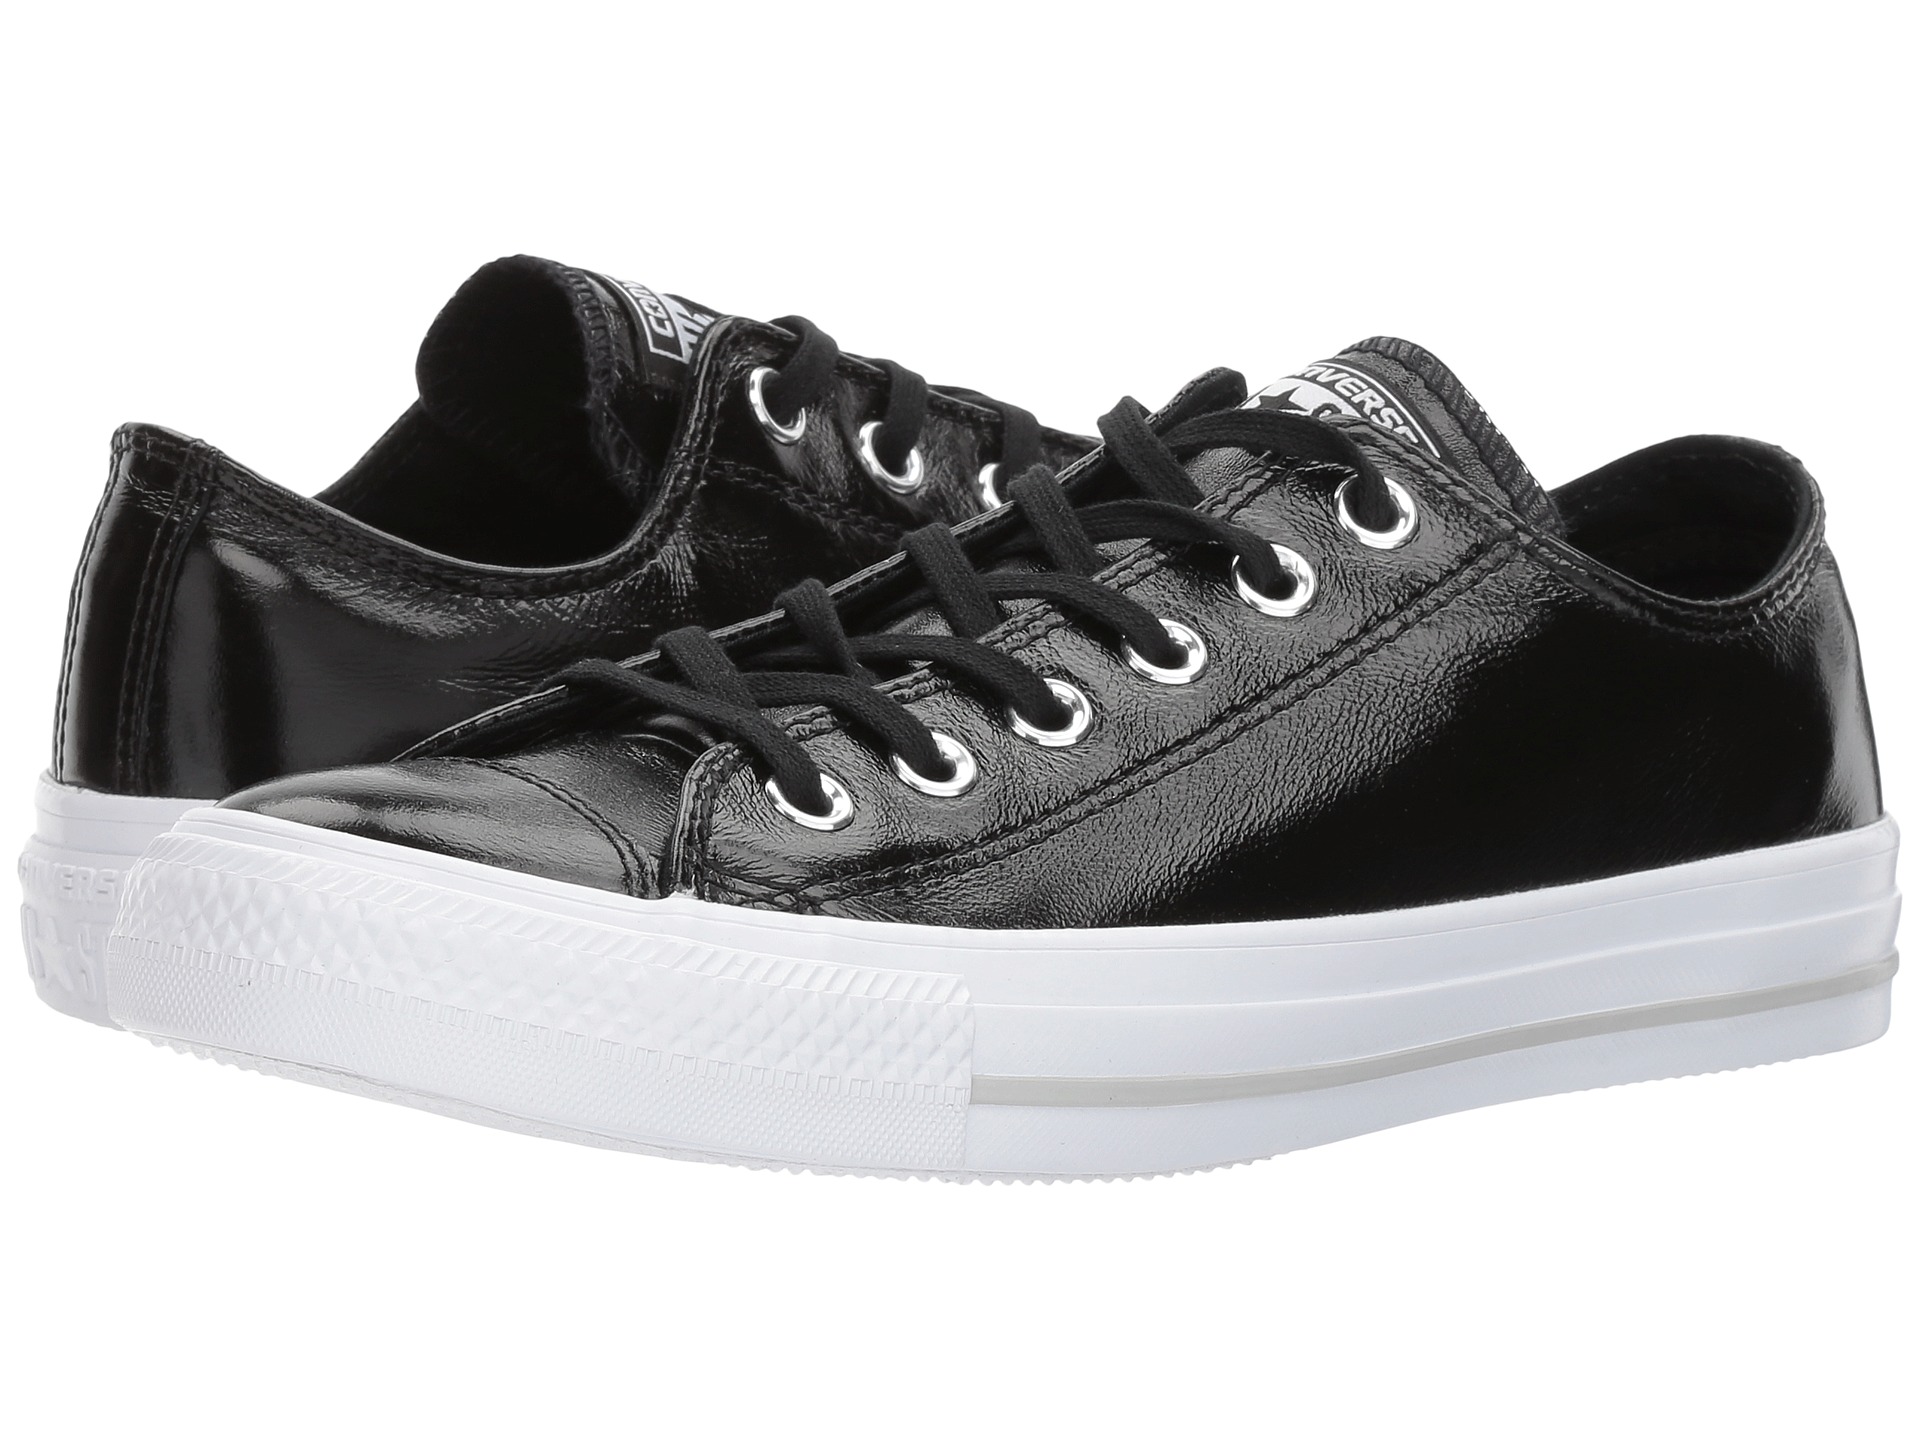 Converse Chuck Taylor® All Star® Crinkled Patent Leather Ox at Zappos.com